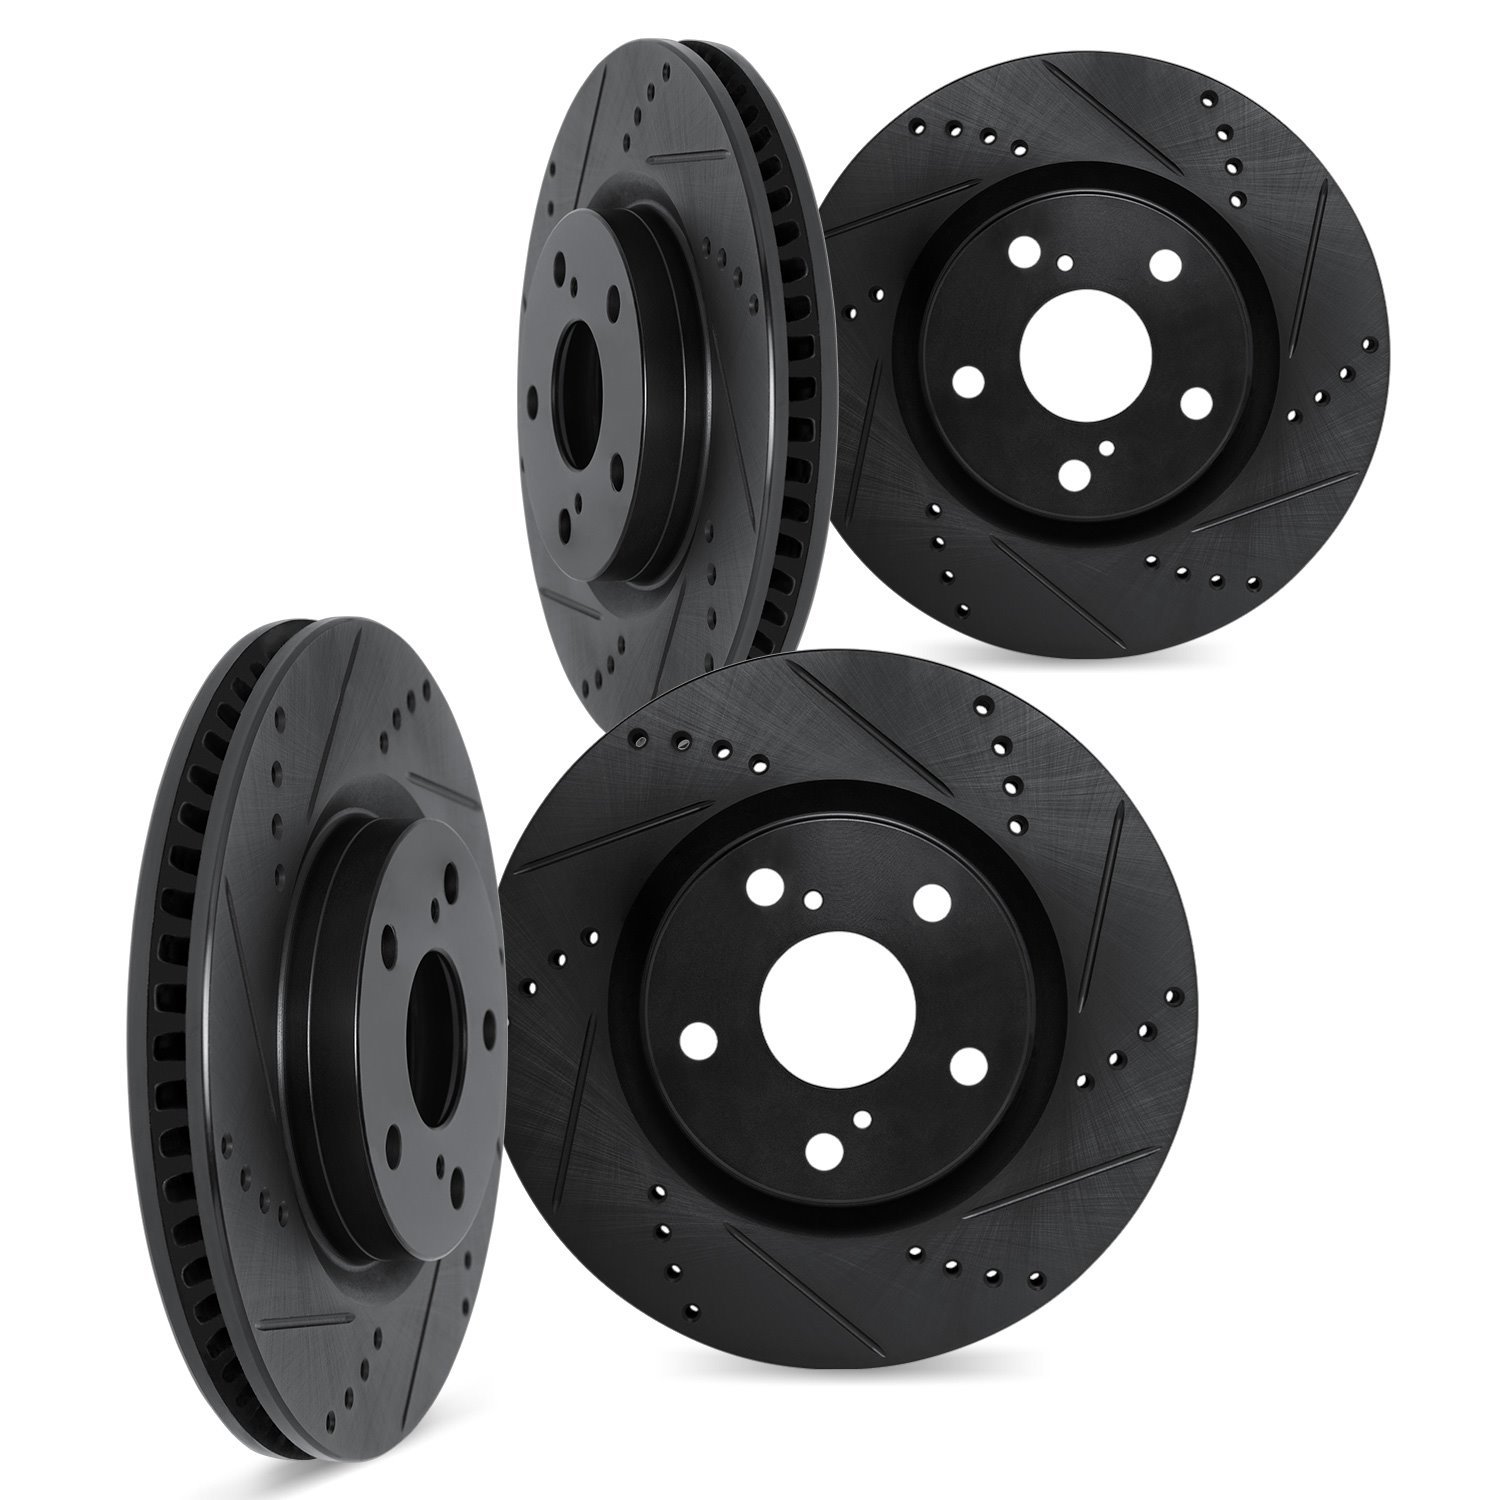 8004-31056 Drilled/Slotted Brake Rotors [Black], 1997-2000 BMW, Position: Front and Rear